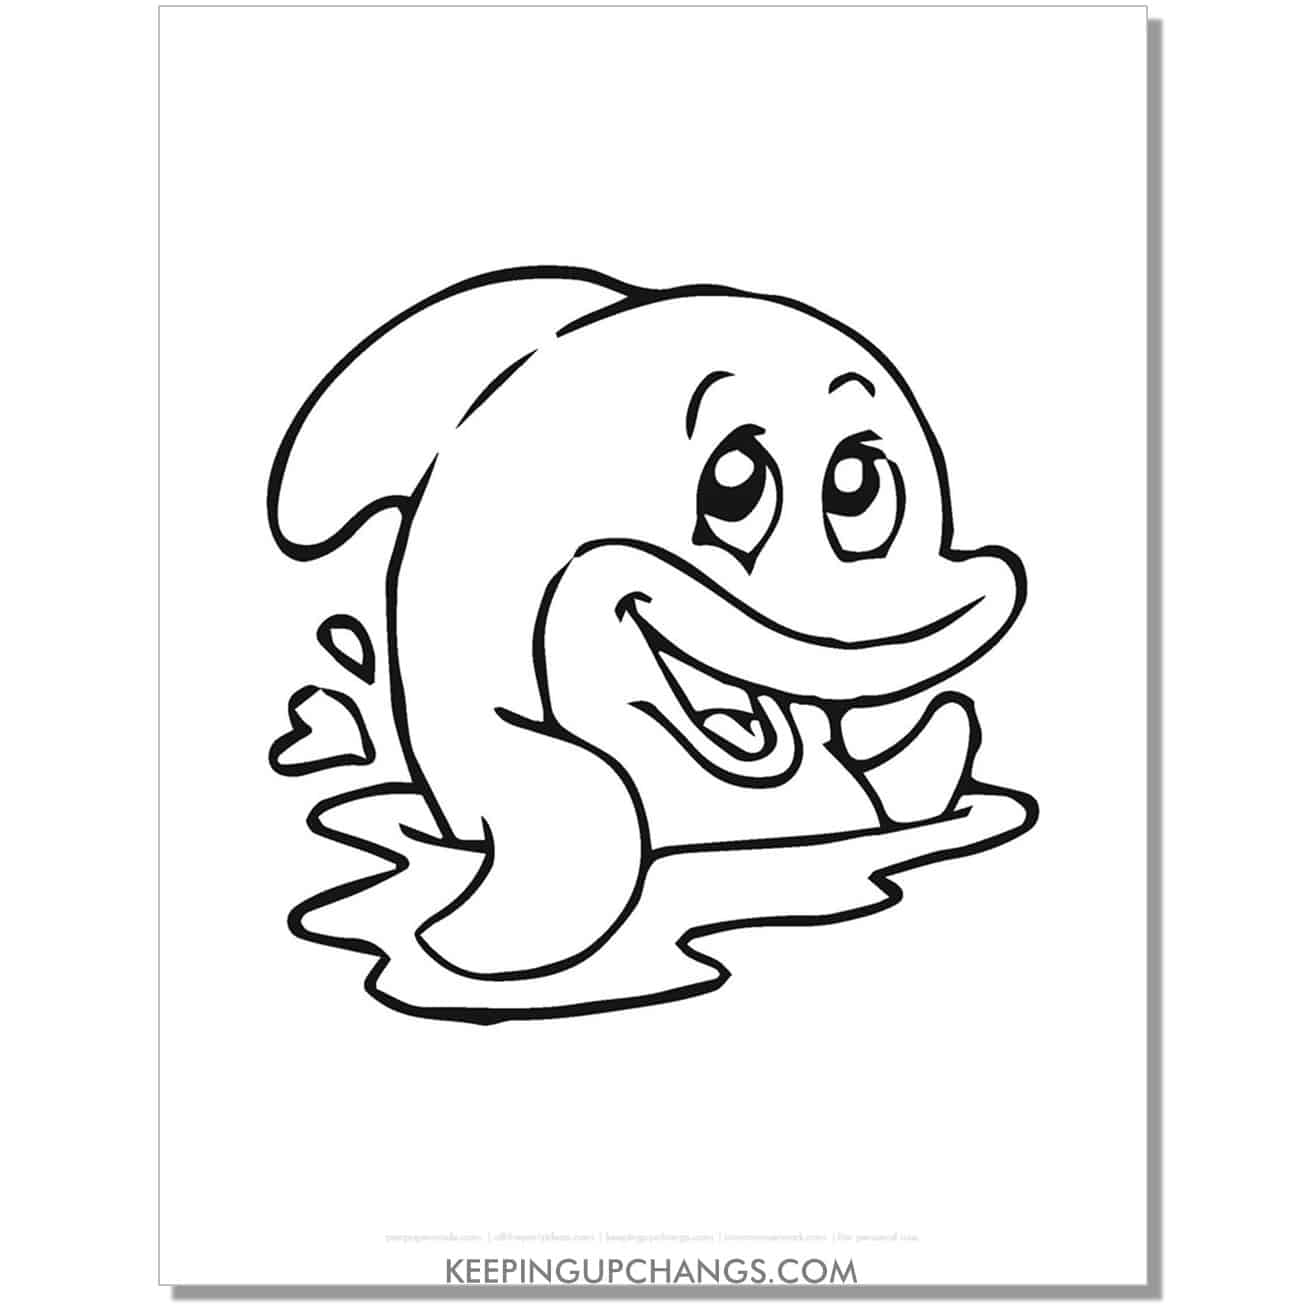 free dolphin hand drawing coloring page, sheet.